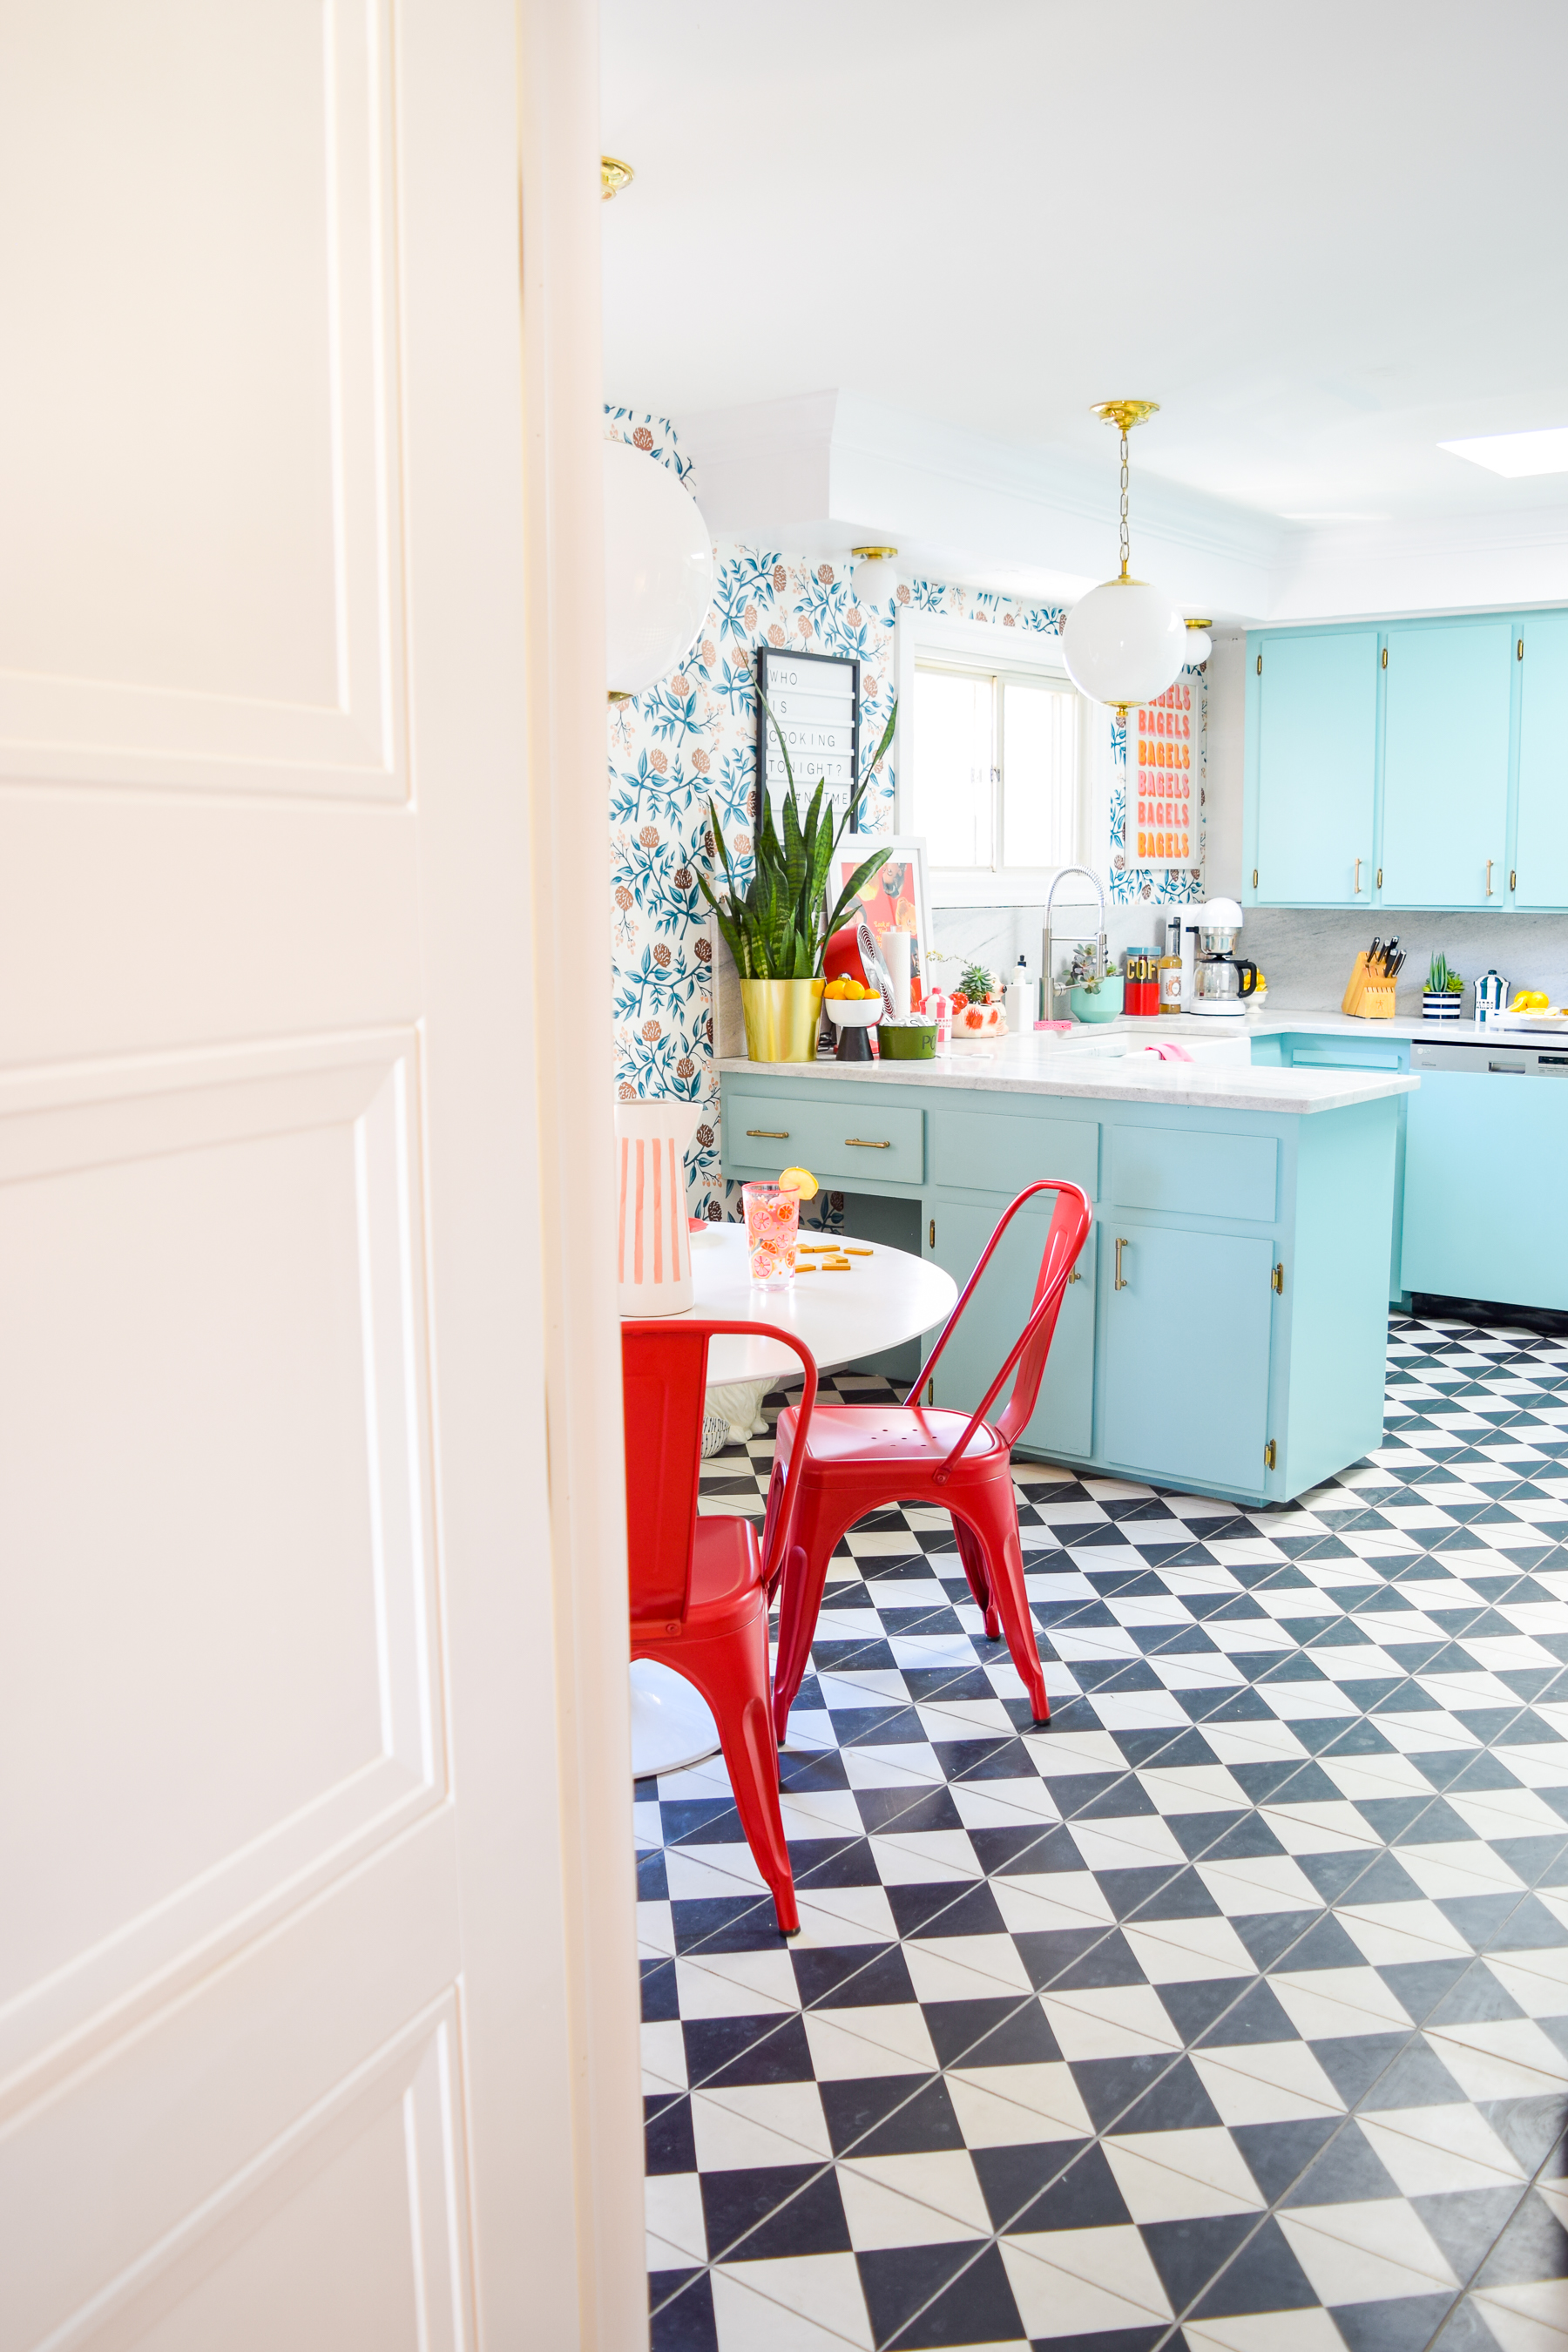 Our retro glam kitchen renovations are done! Come see how we transformed our dated kitchen, into a modern oasis, full of colour and pattern.